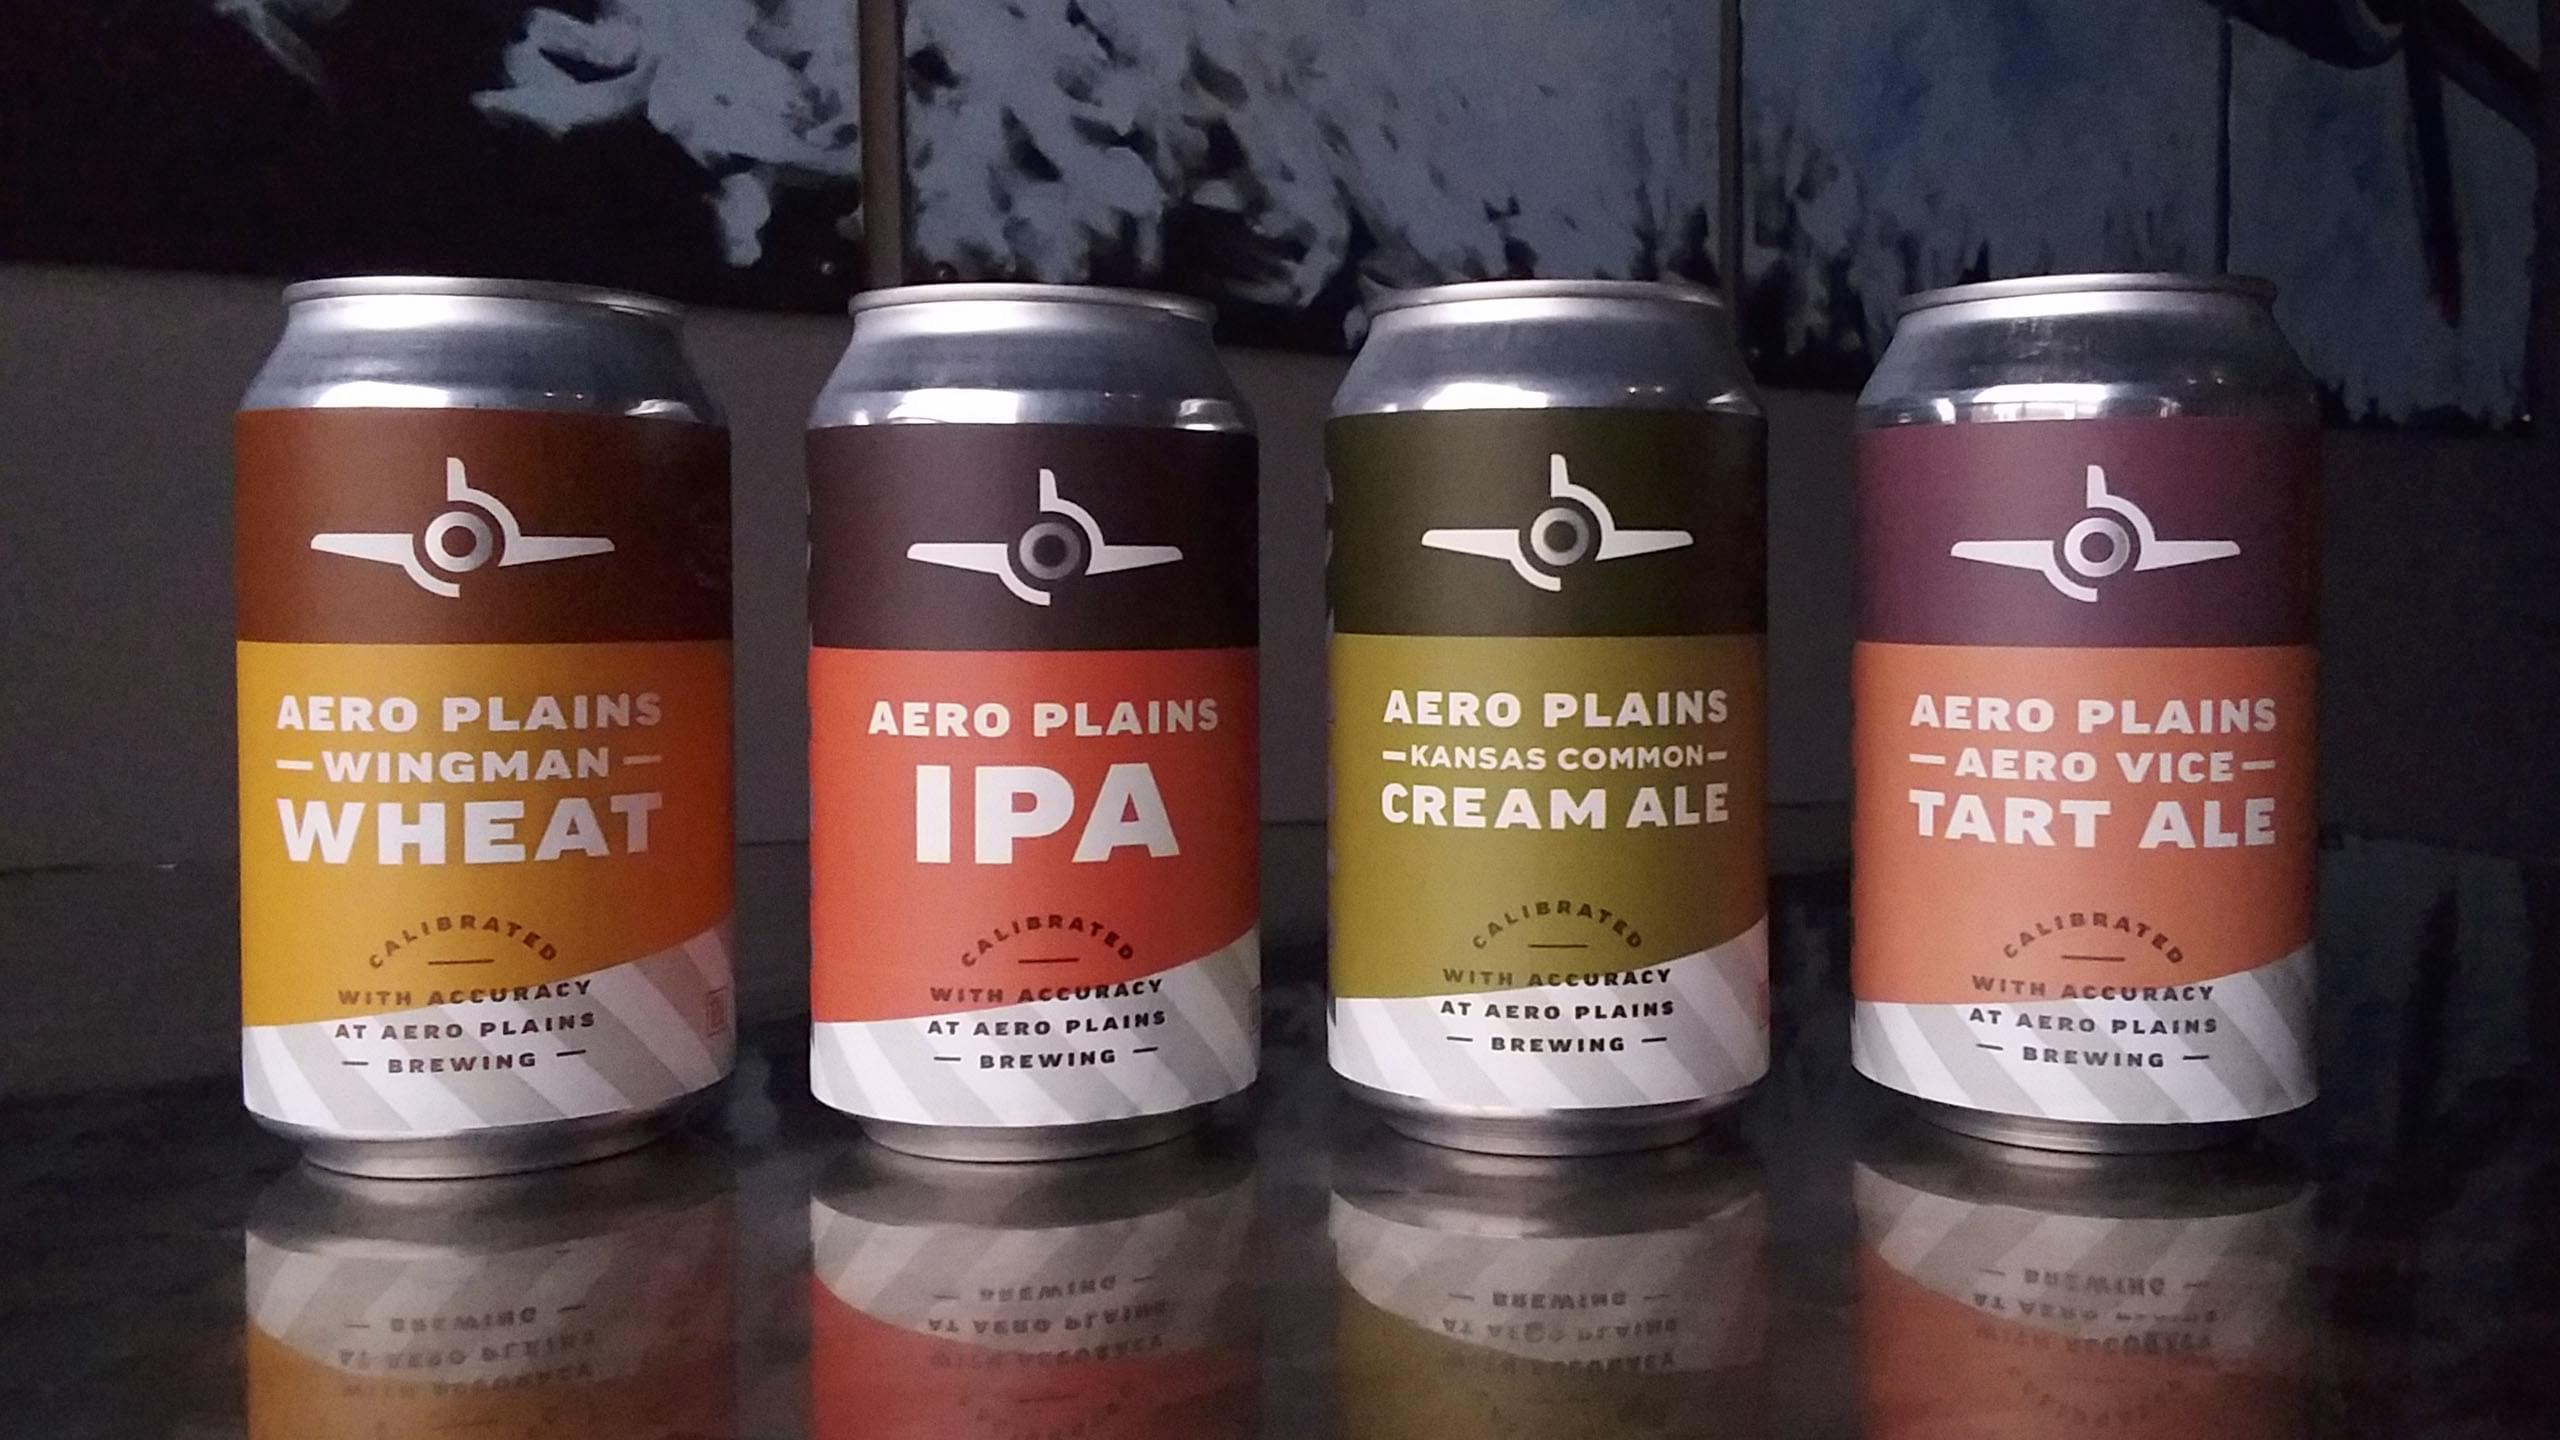 Flexo roll labels on craft beer cans